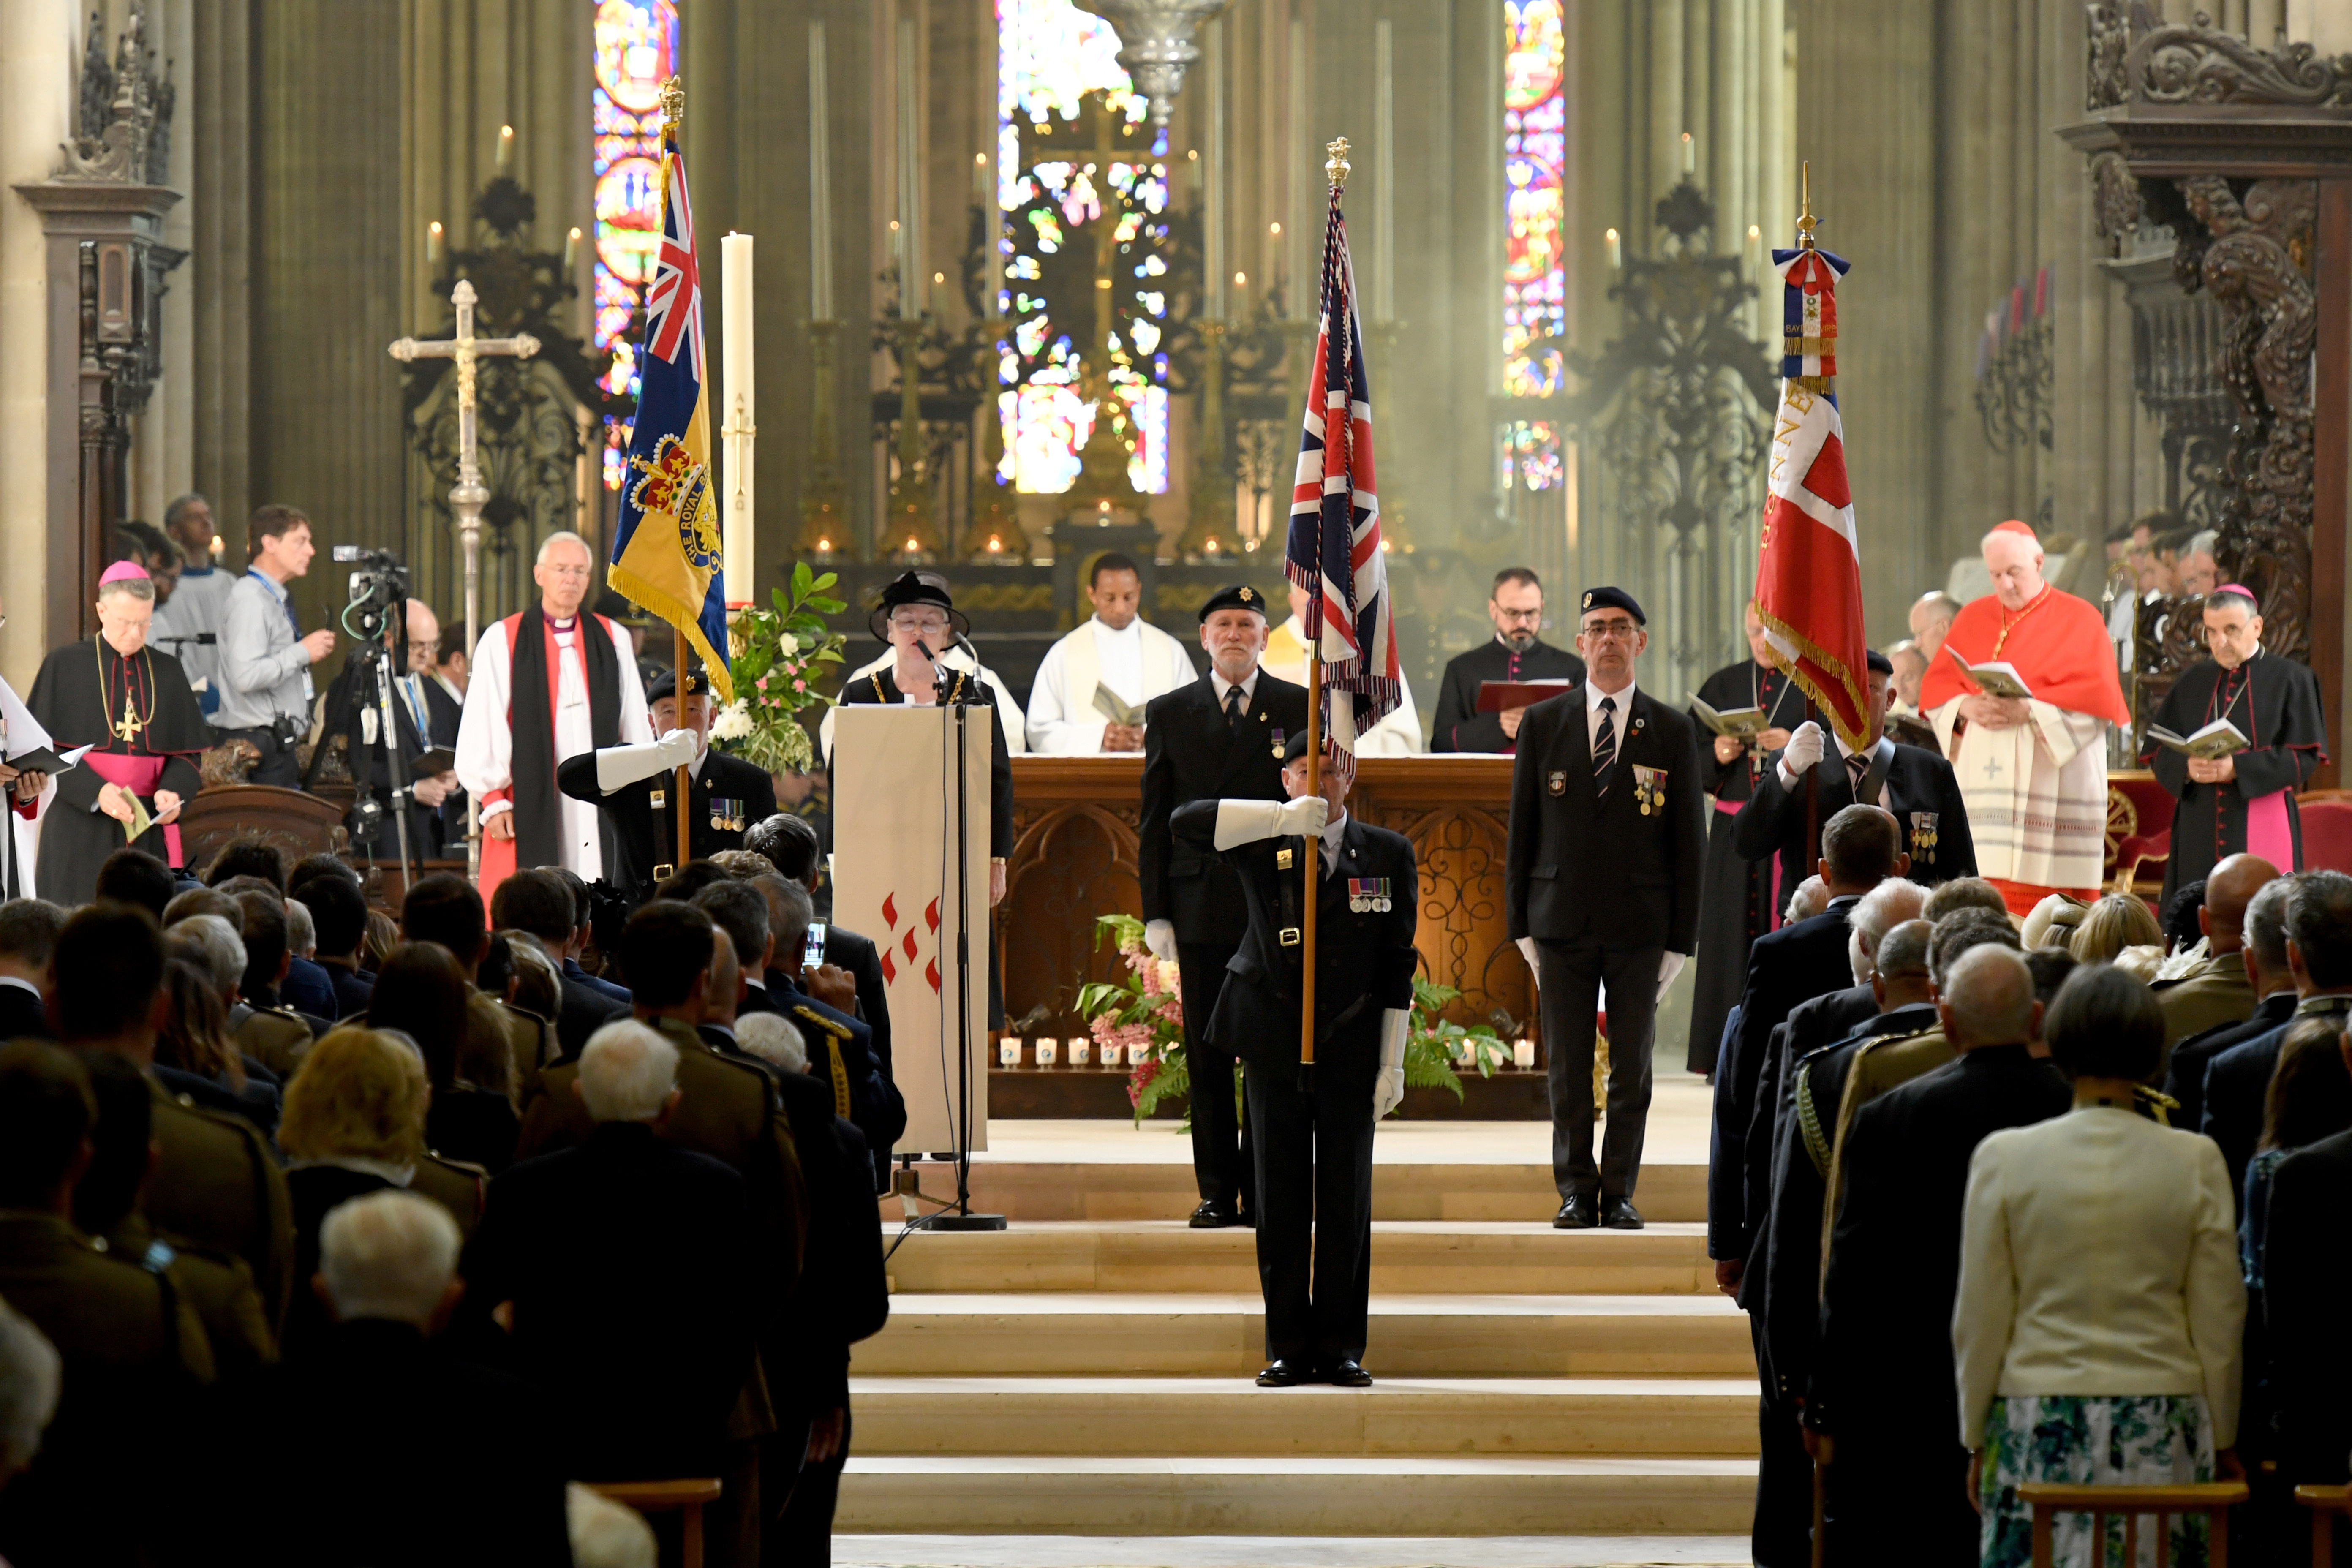 Pope joins church leaders in recalling D-Day sacrifices of thousands